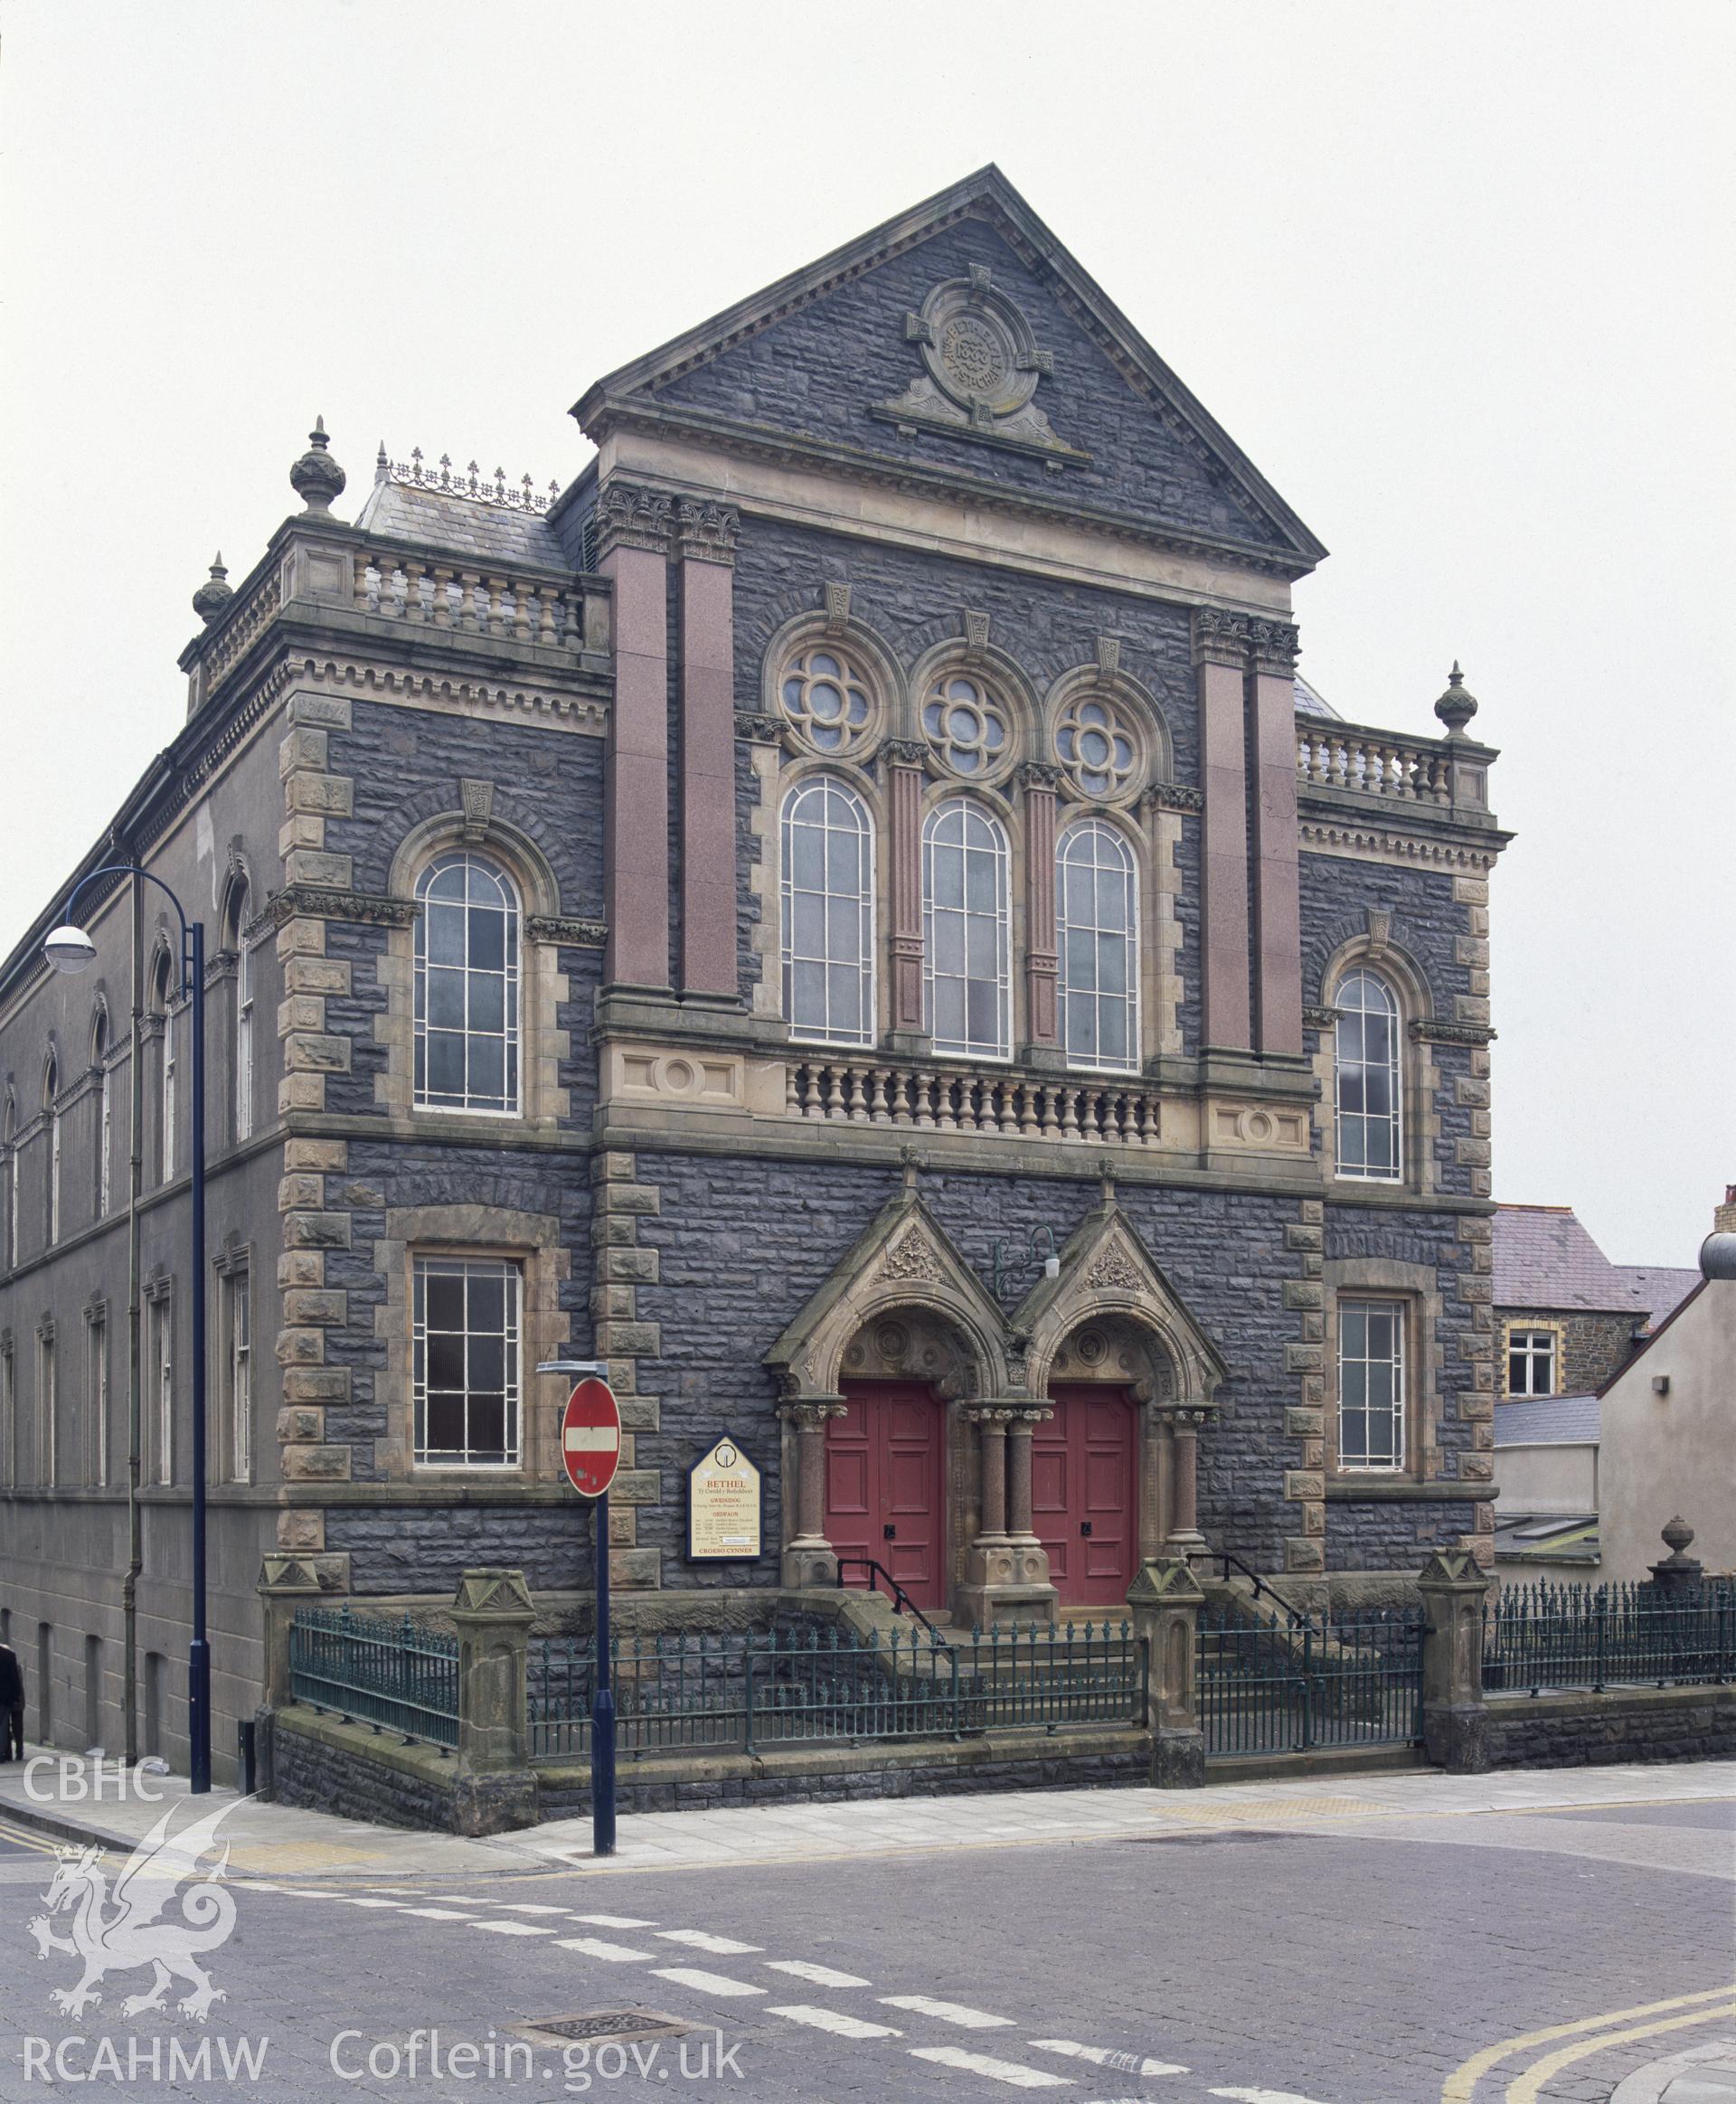 RCAHMW colour transparency showing exterior view of Bethel Chapel, Aberystwyth